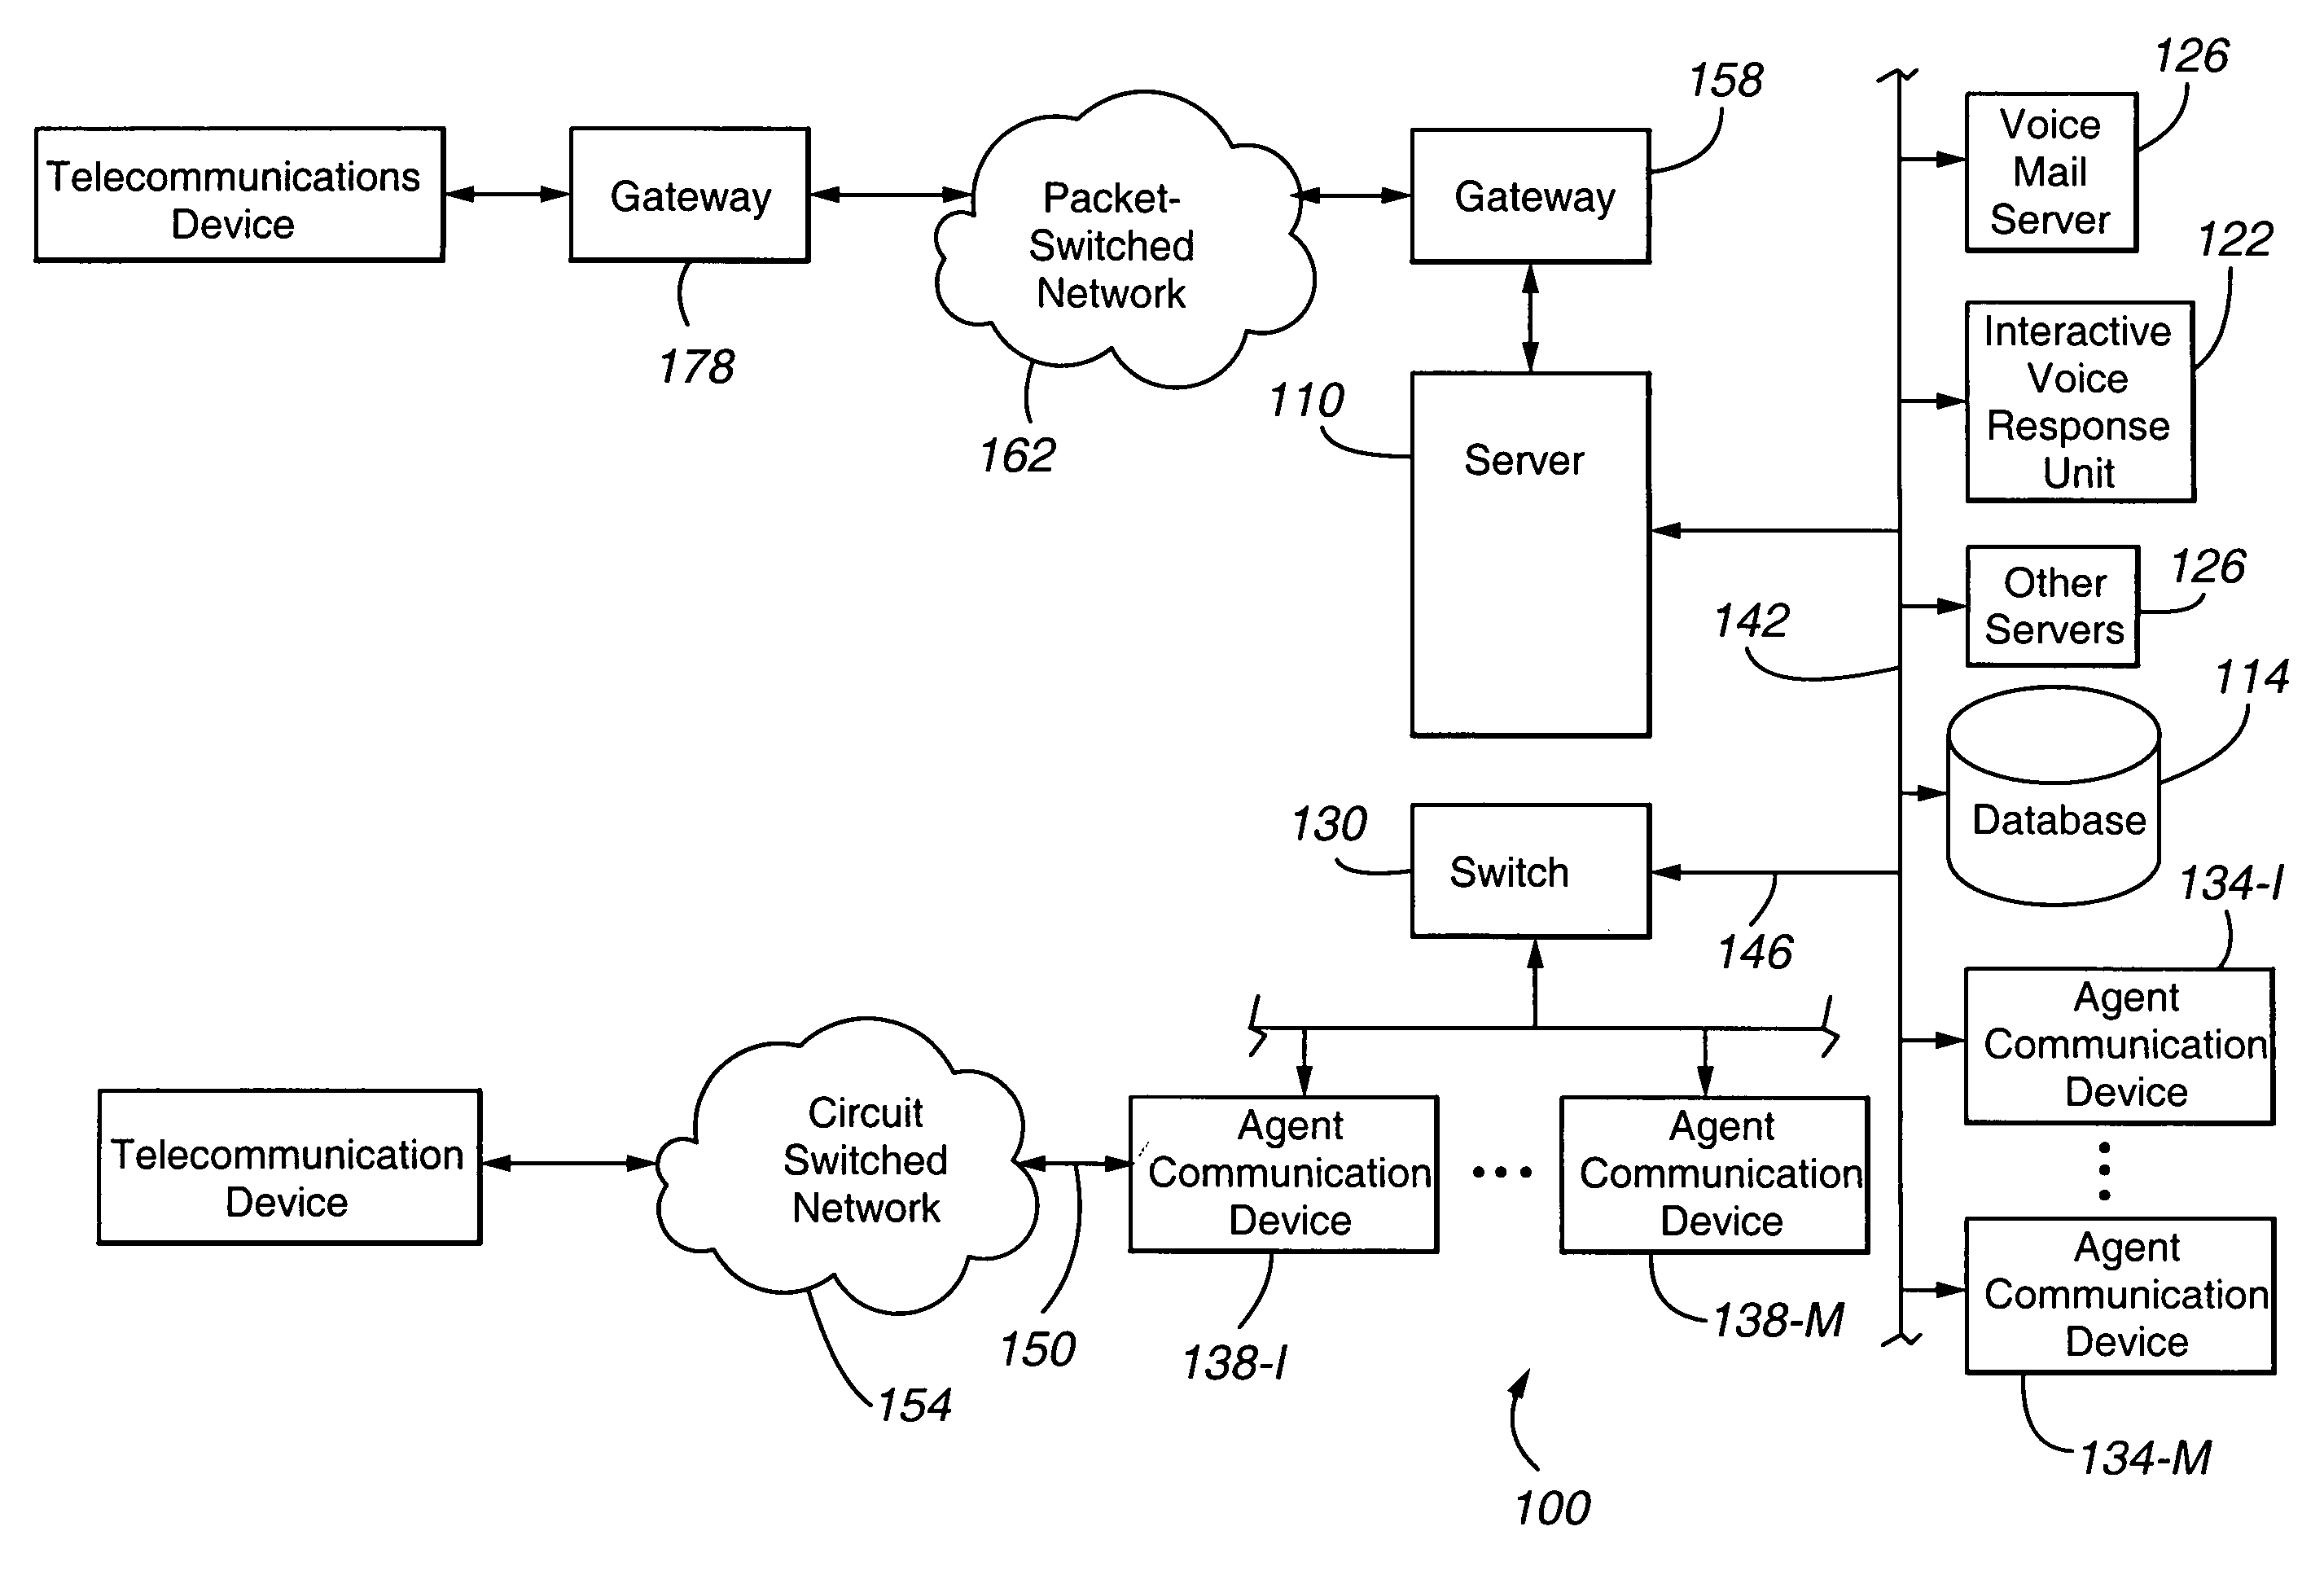 Data model of participation in multi-channel and multi-party contacts